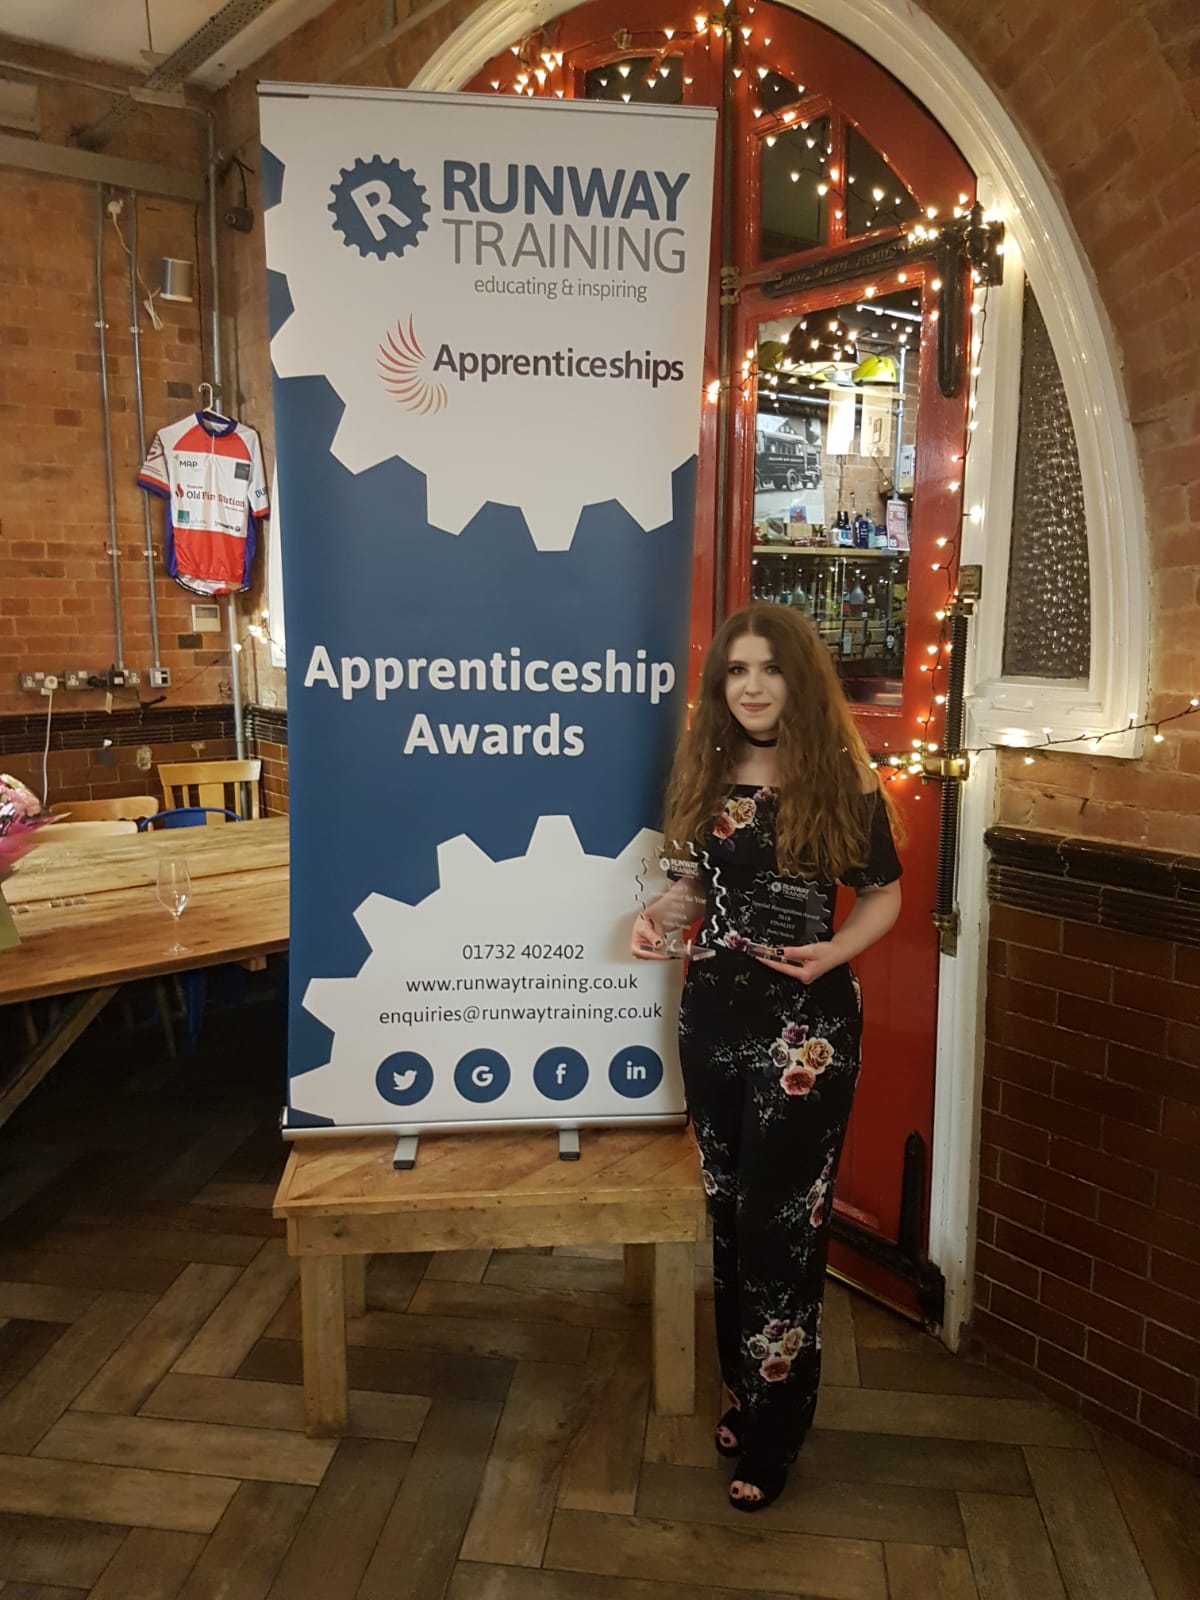 North Kent College’s Digital Marketing Apprentice, Becky Szekely, 20 from Dartford, wins “Apprentice of the Year”